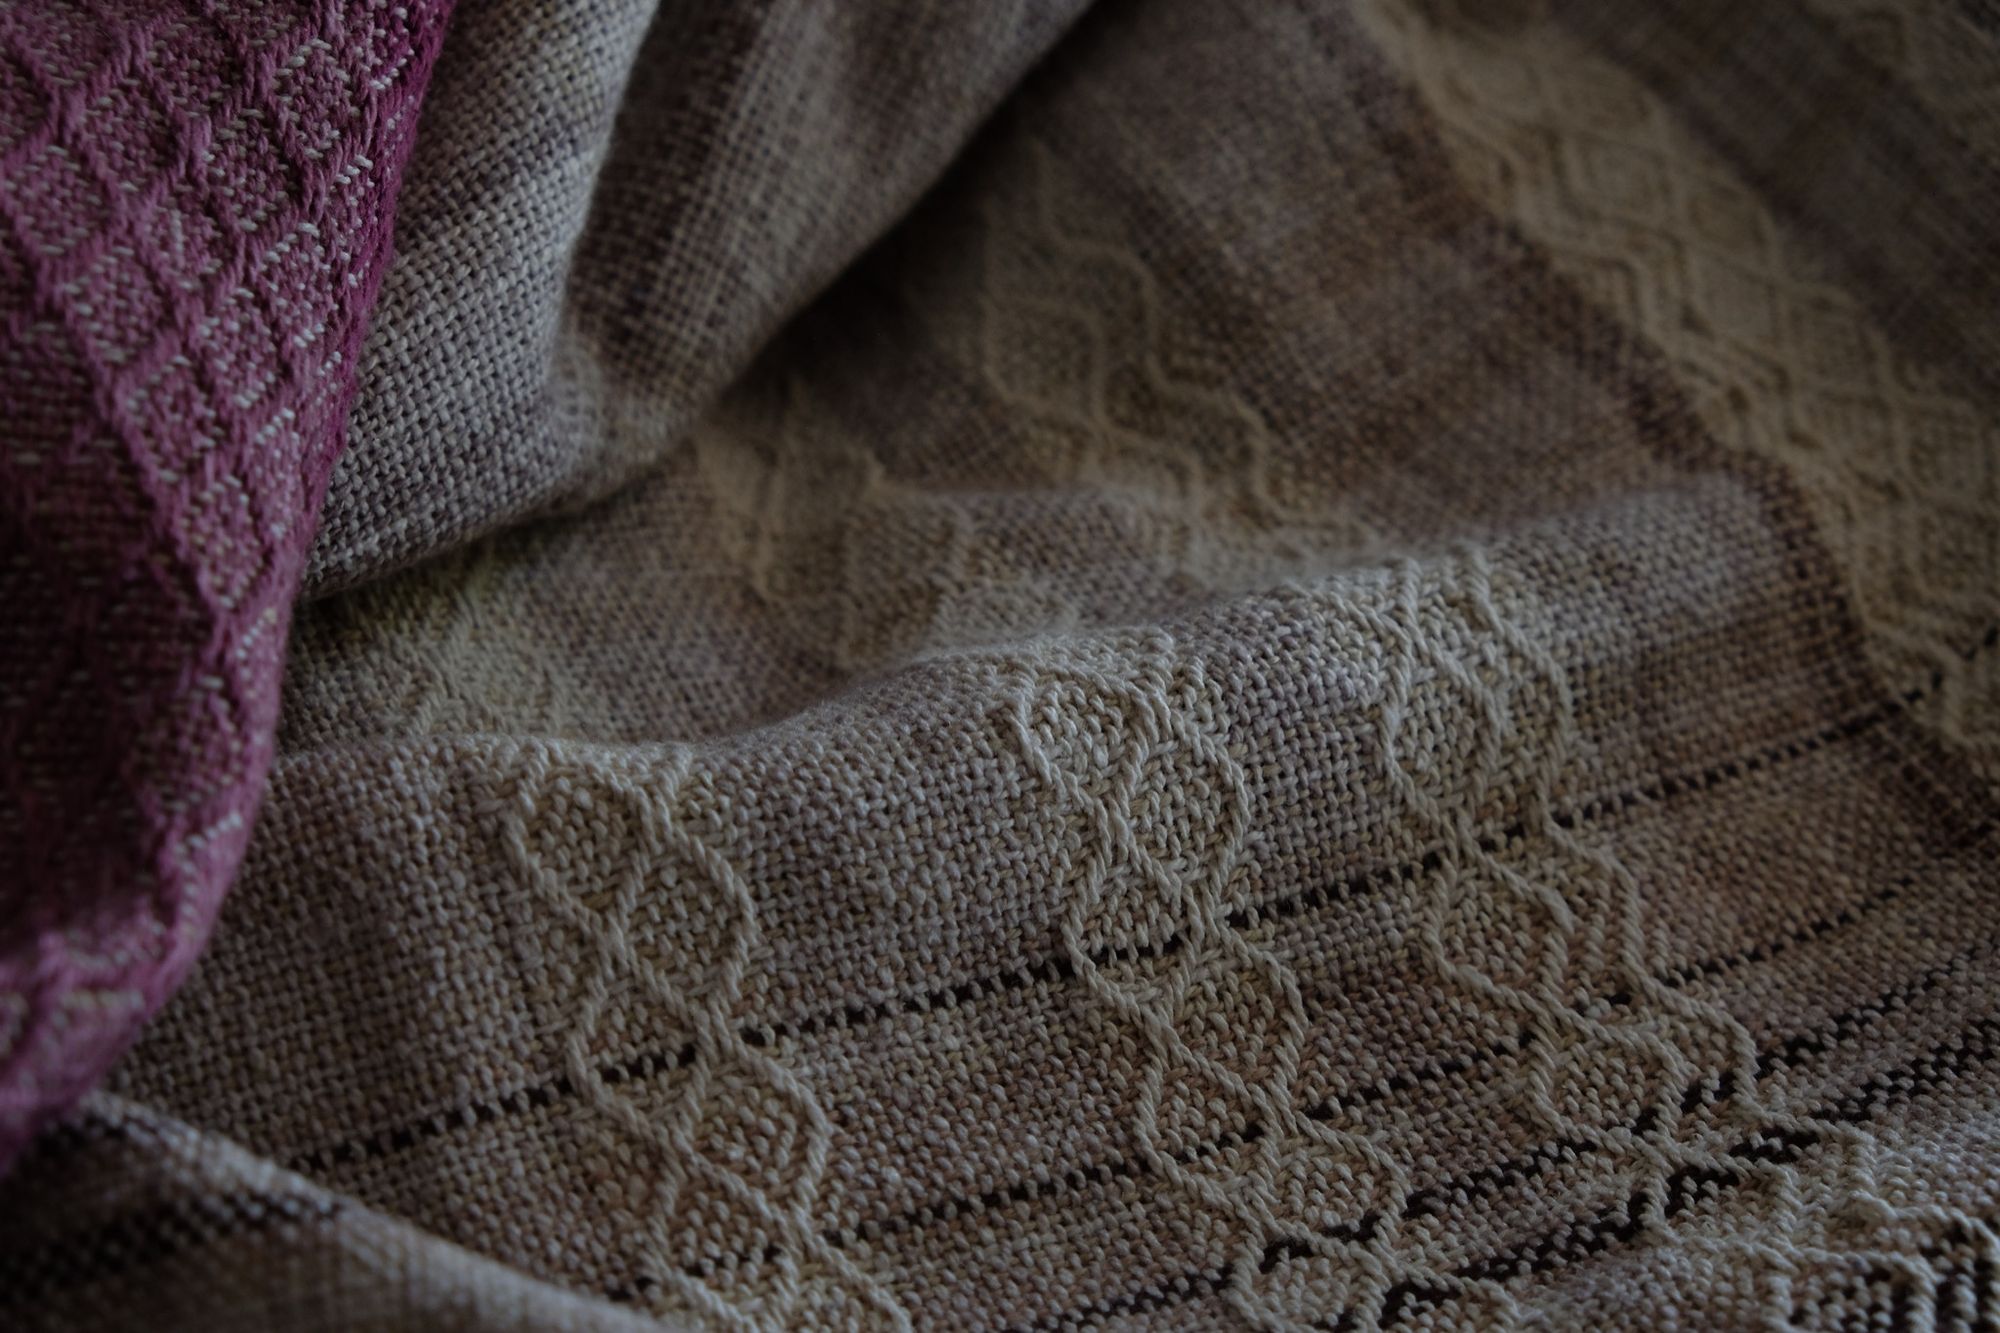 A handwoven, diamond pattern shawl in blues, grey, black, brown, pink and green laying on a wooden flor